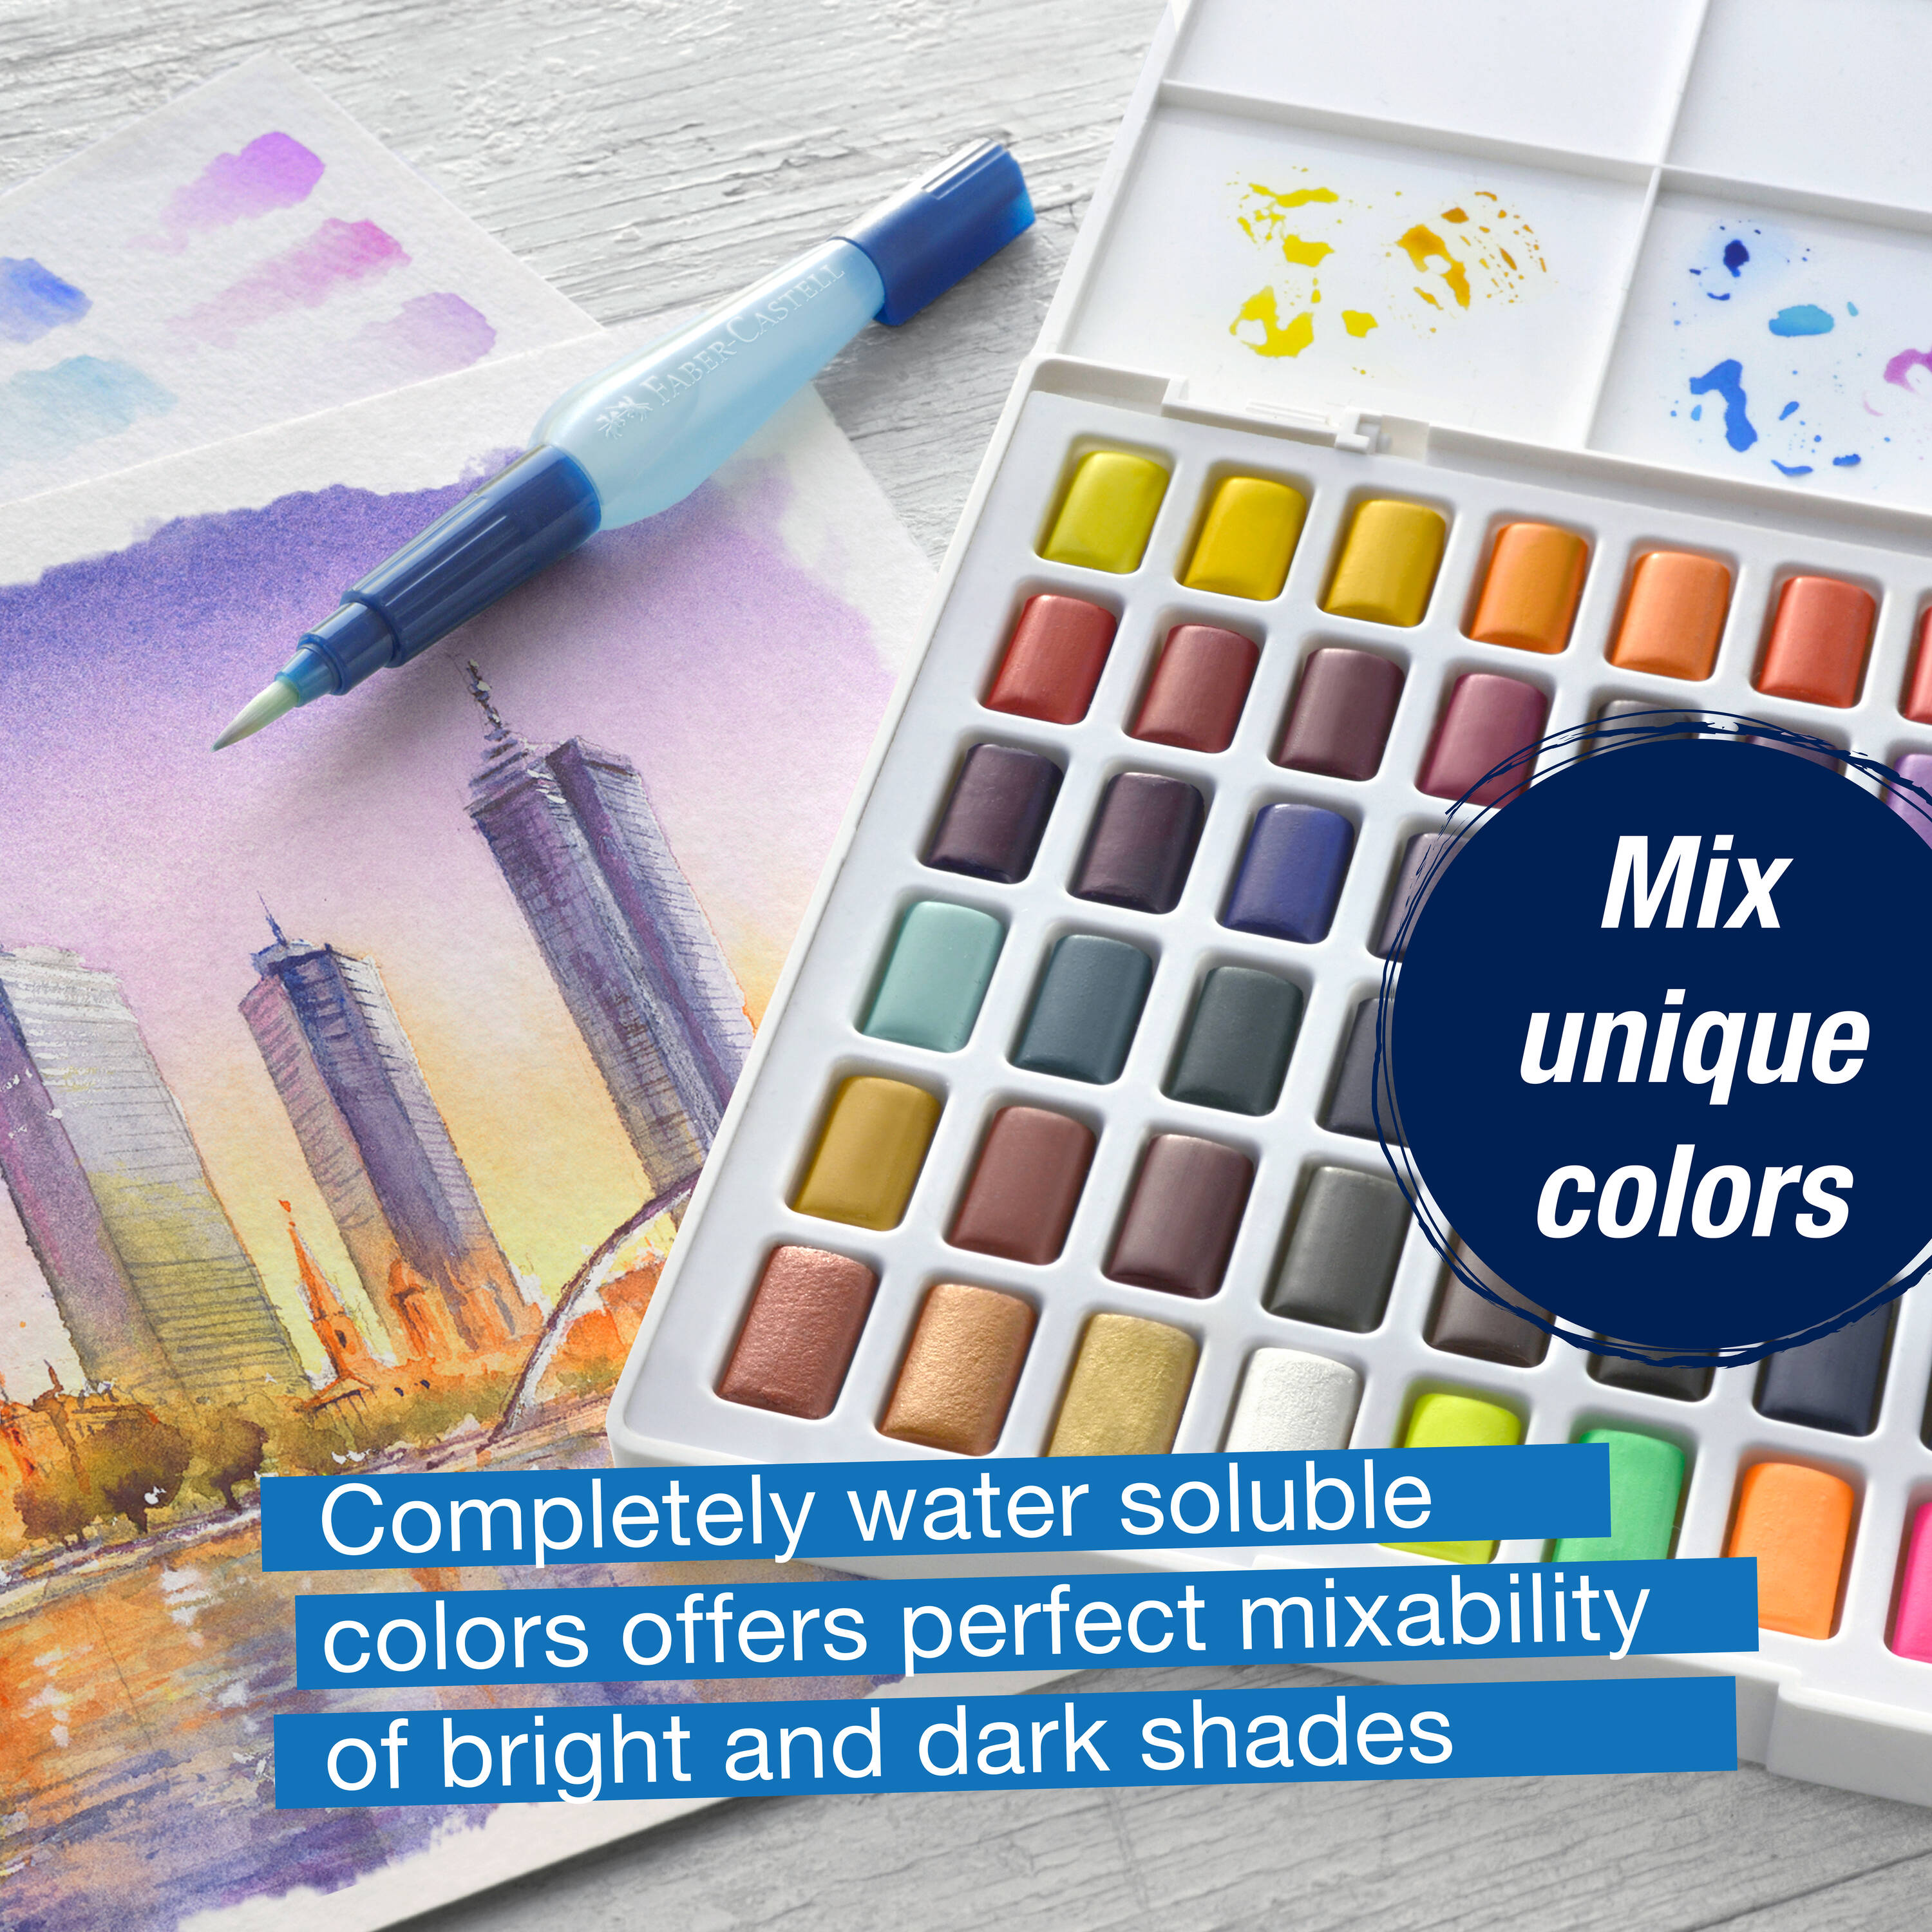 36 Pack Watercolor Pan Set Smart Color Art Watercolor Paint Set with 4 Brushes Easy to Blend Colors Perfect for Kids Adults